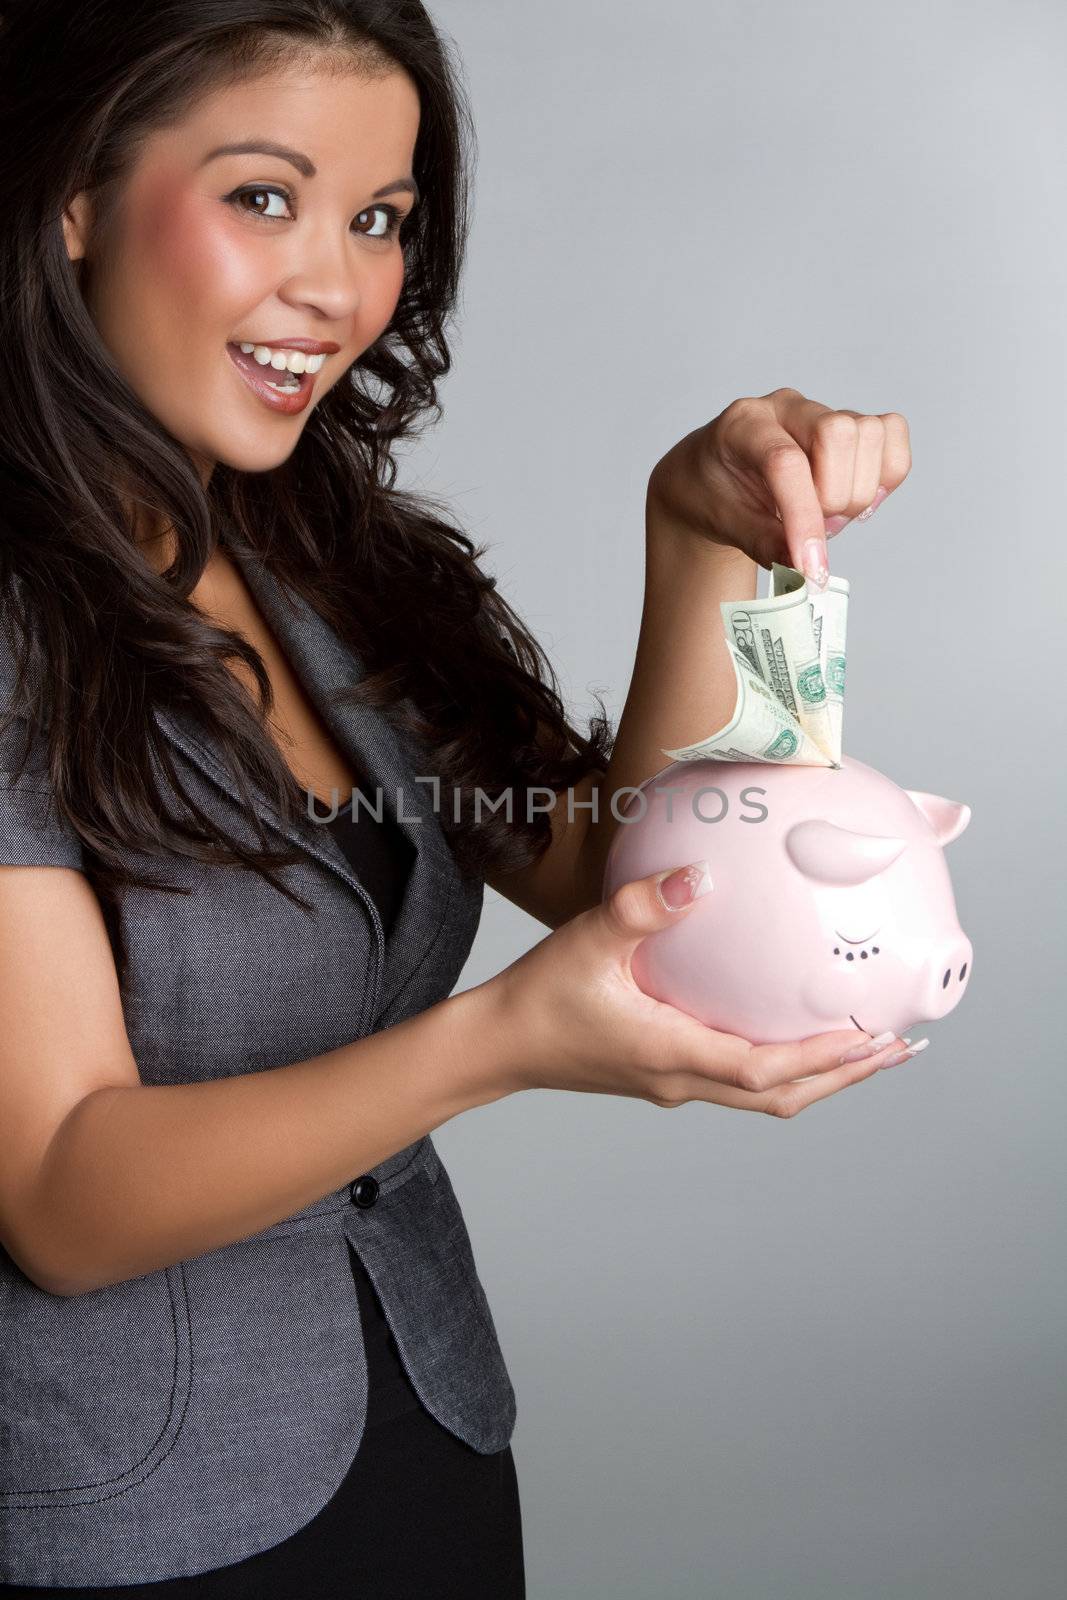 Piggy Bank Woman by keeweeboy